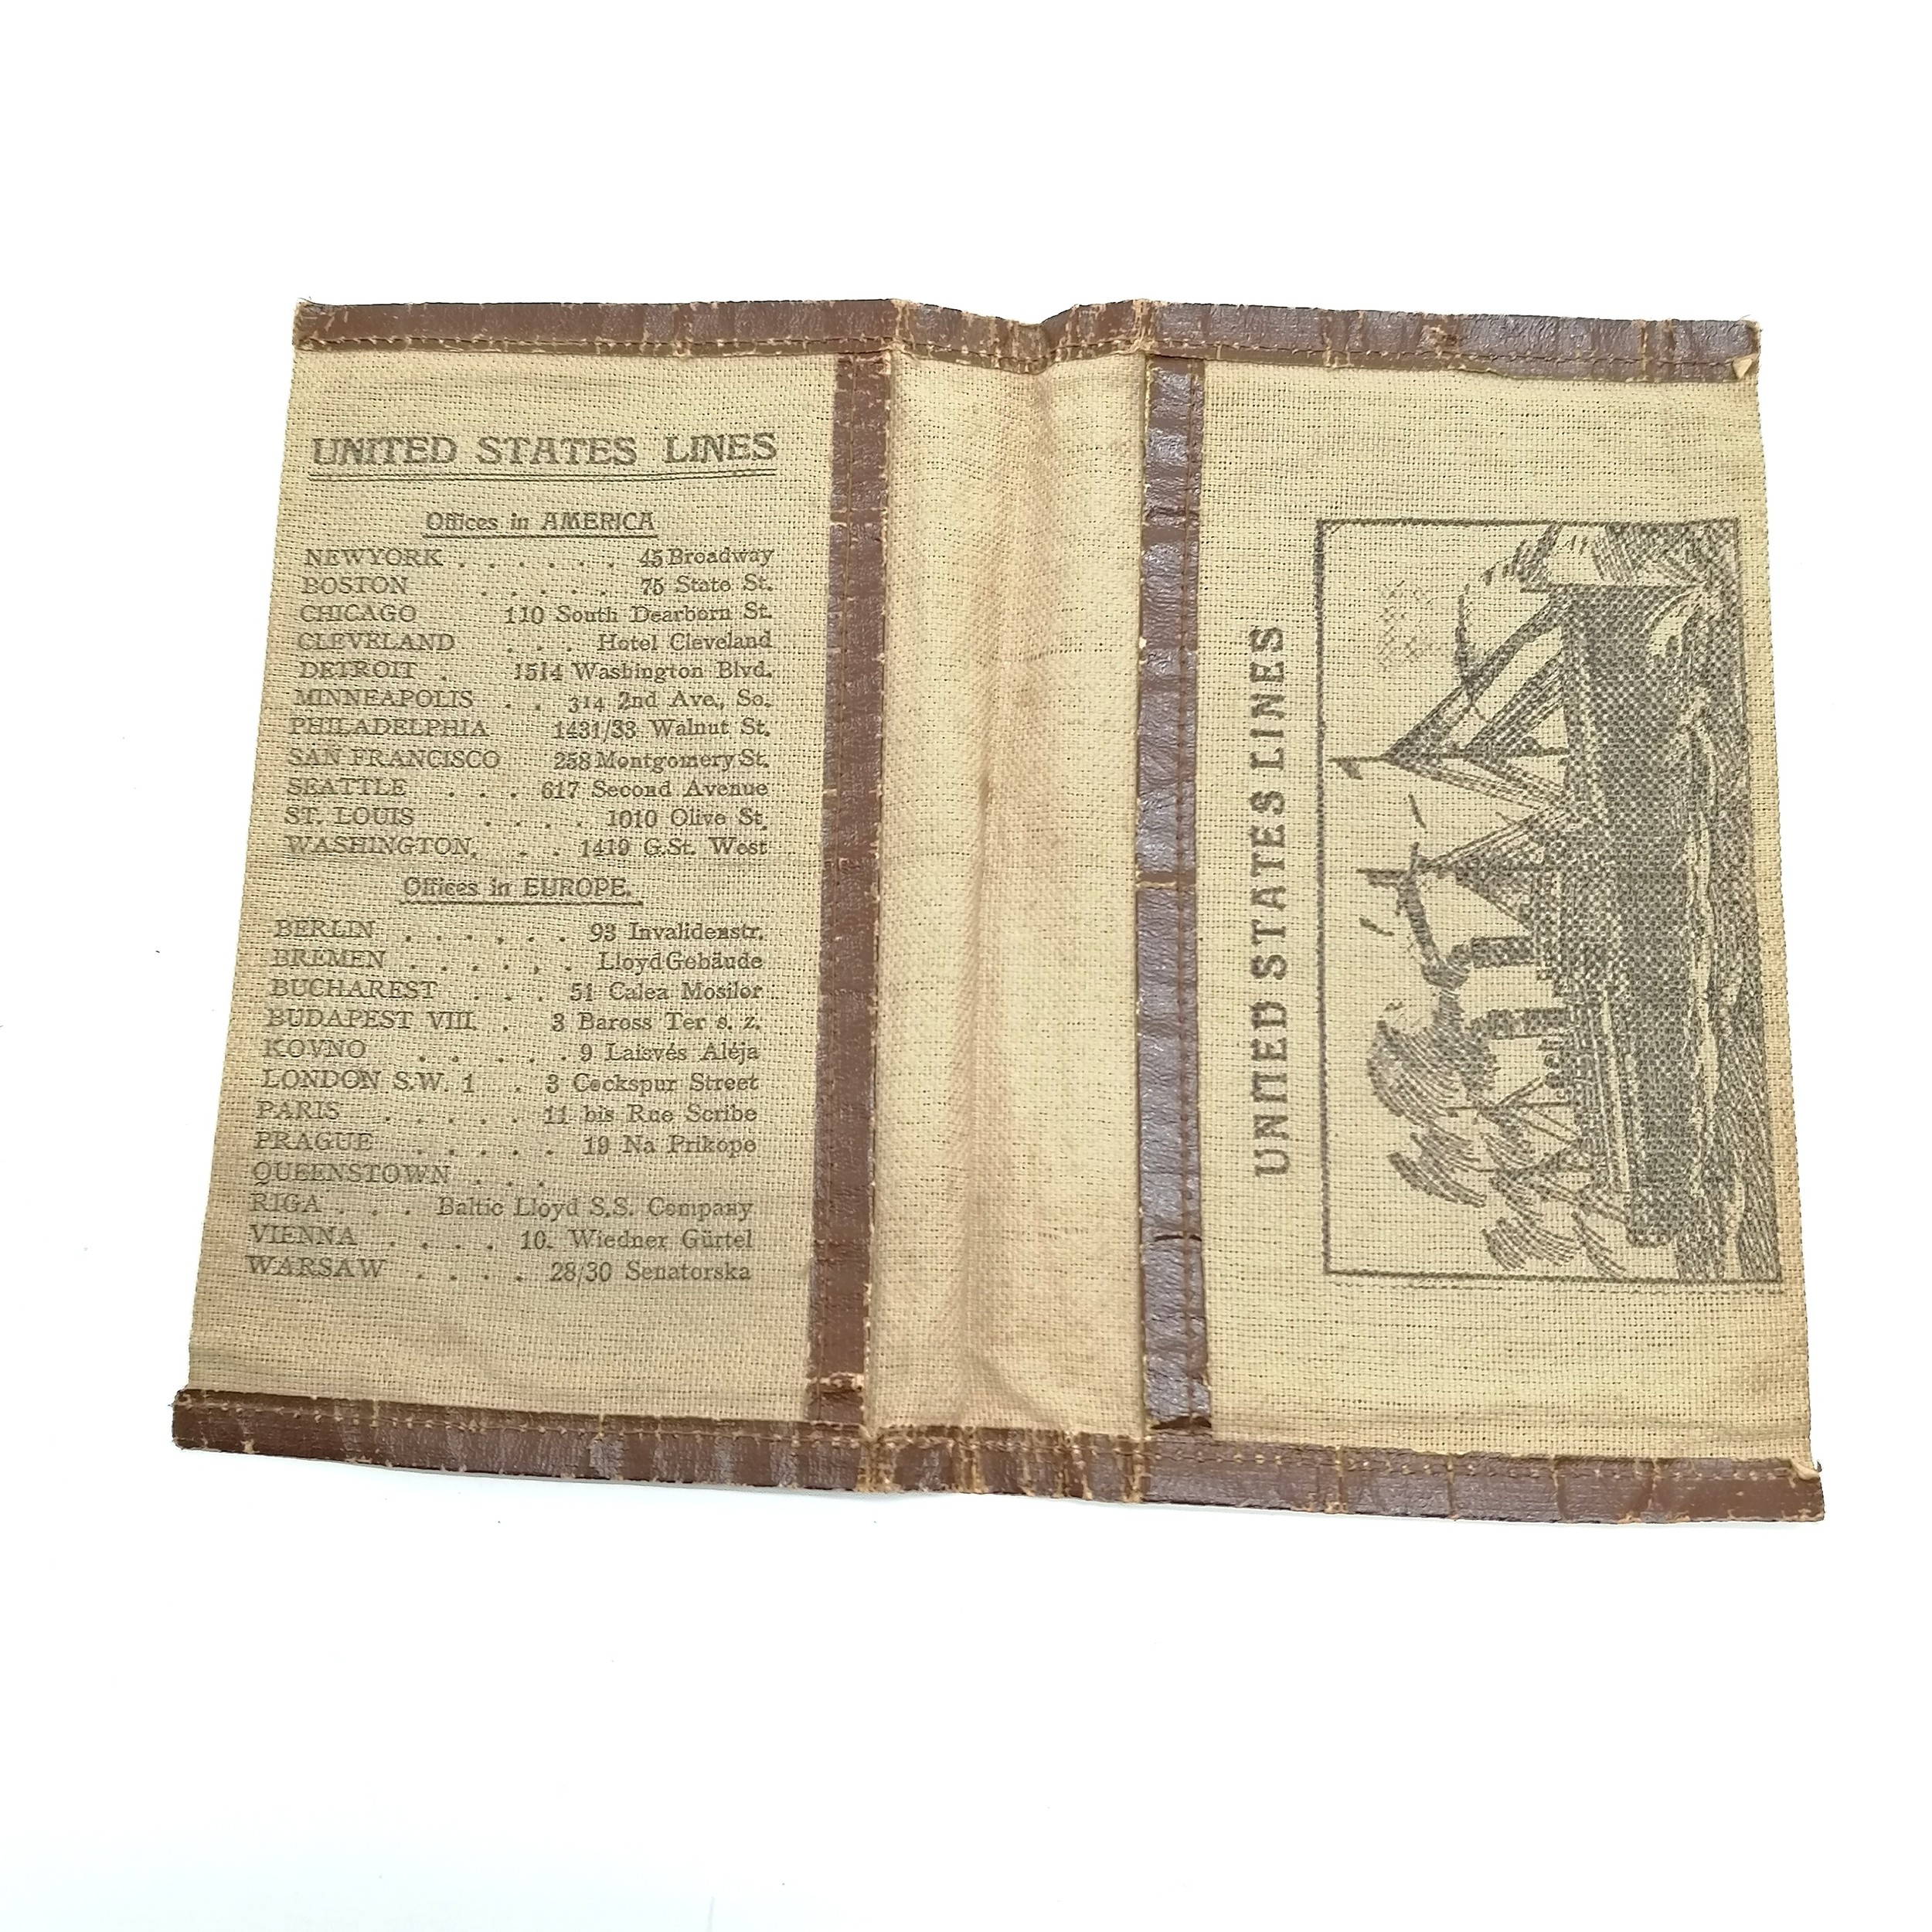 1924 United States Lines folder containing s/s Leviathan boarding pass, 6 postcards + photos - Image 2 of 4